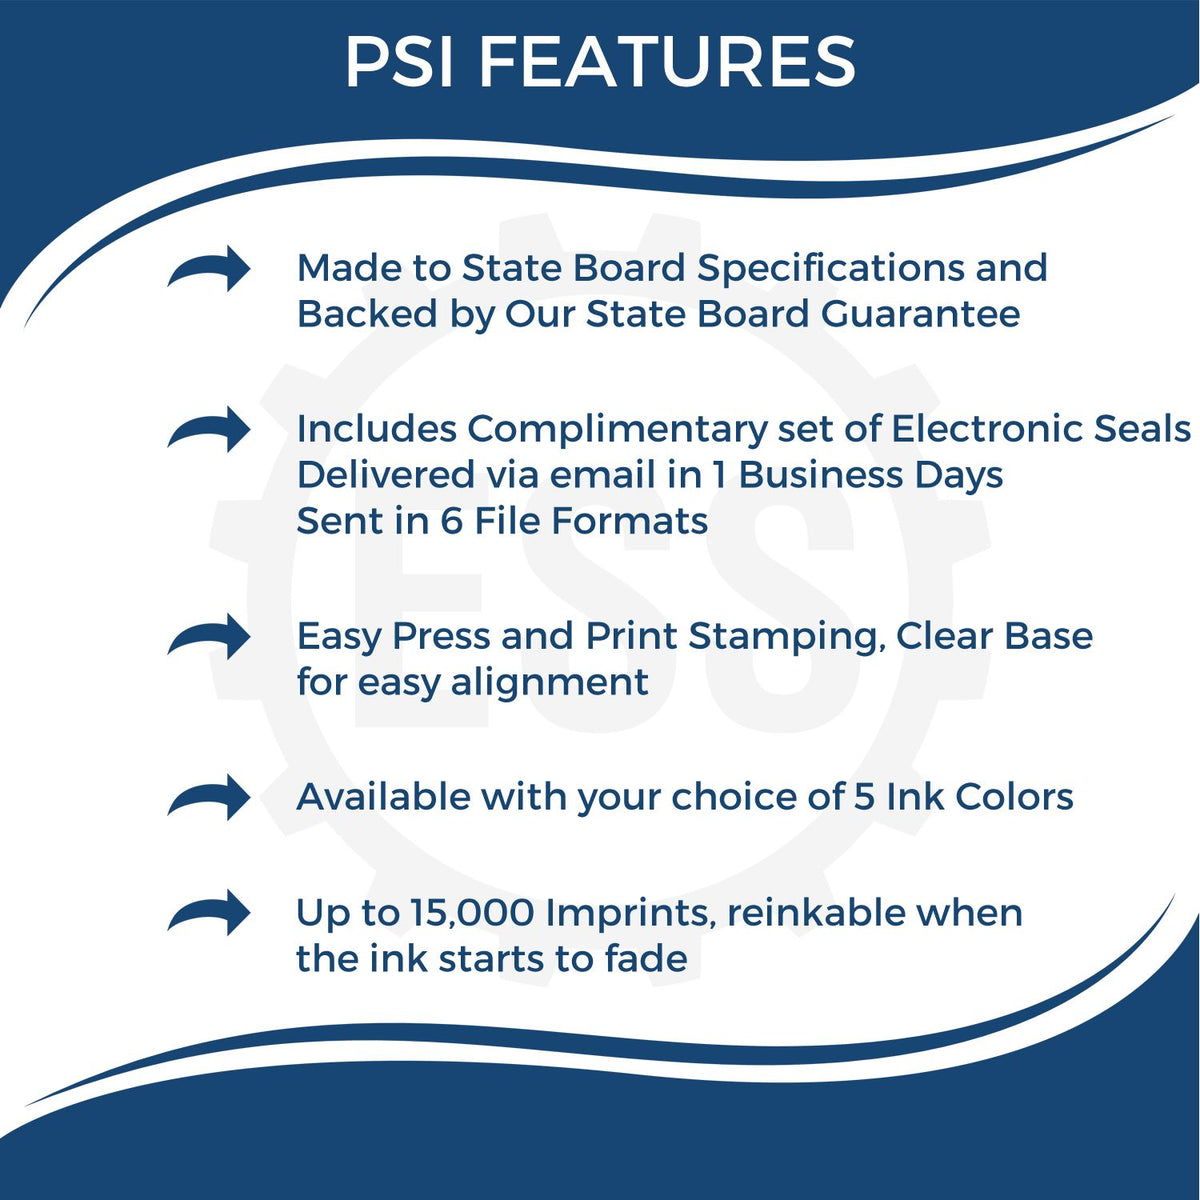 A picture of an infographic highlighting the selling points for the PSI Connecticut Notary Stamp